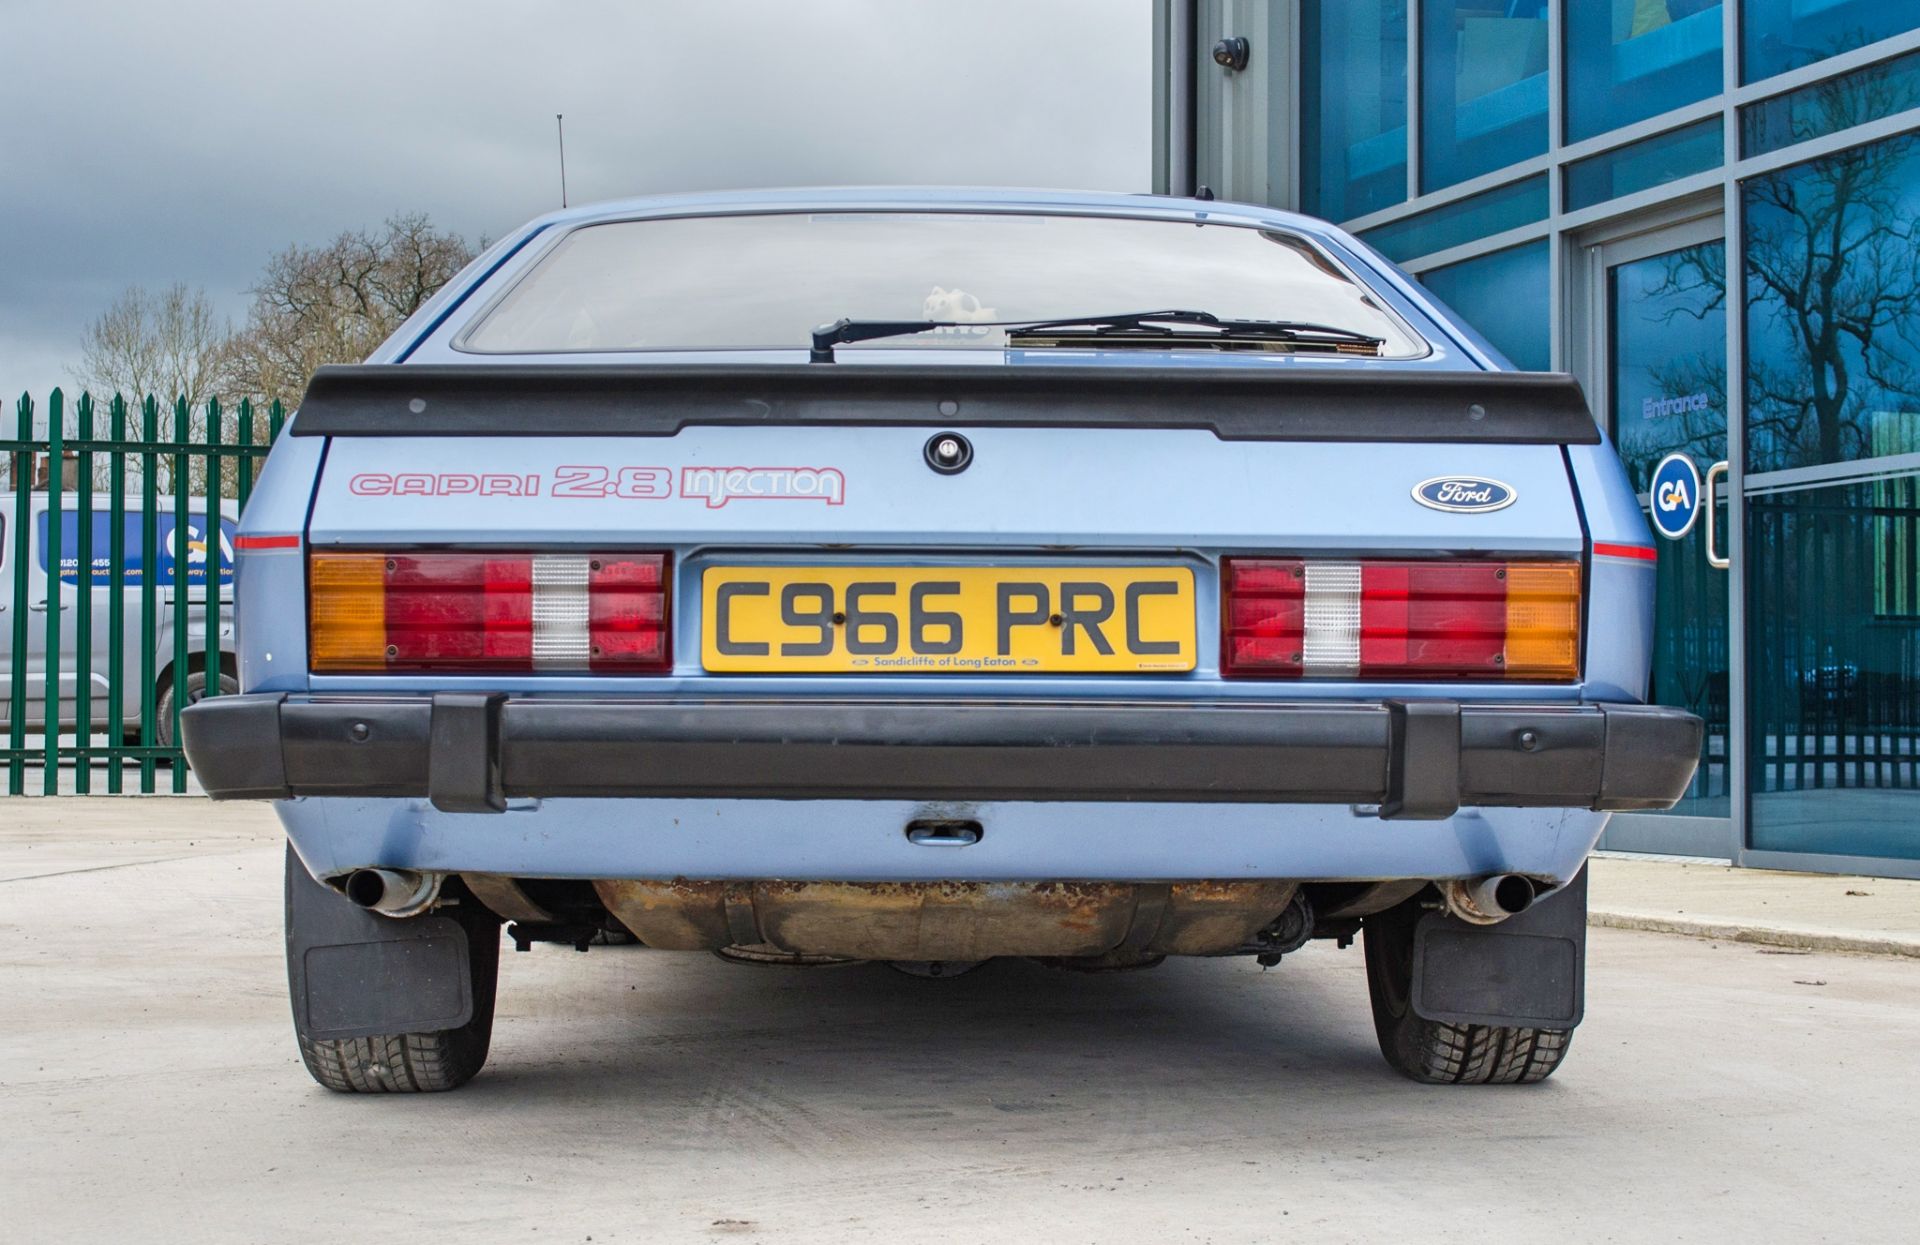 1986 Ford Capri 2.8 Injection Special 3 door coupe - Image 11 of 56